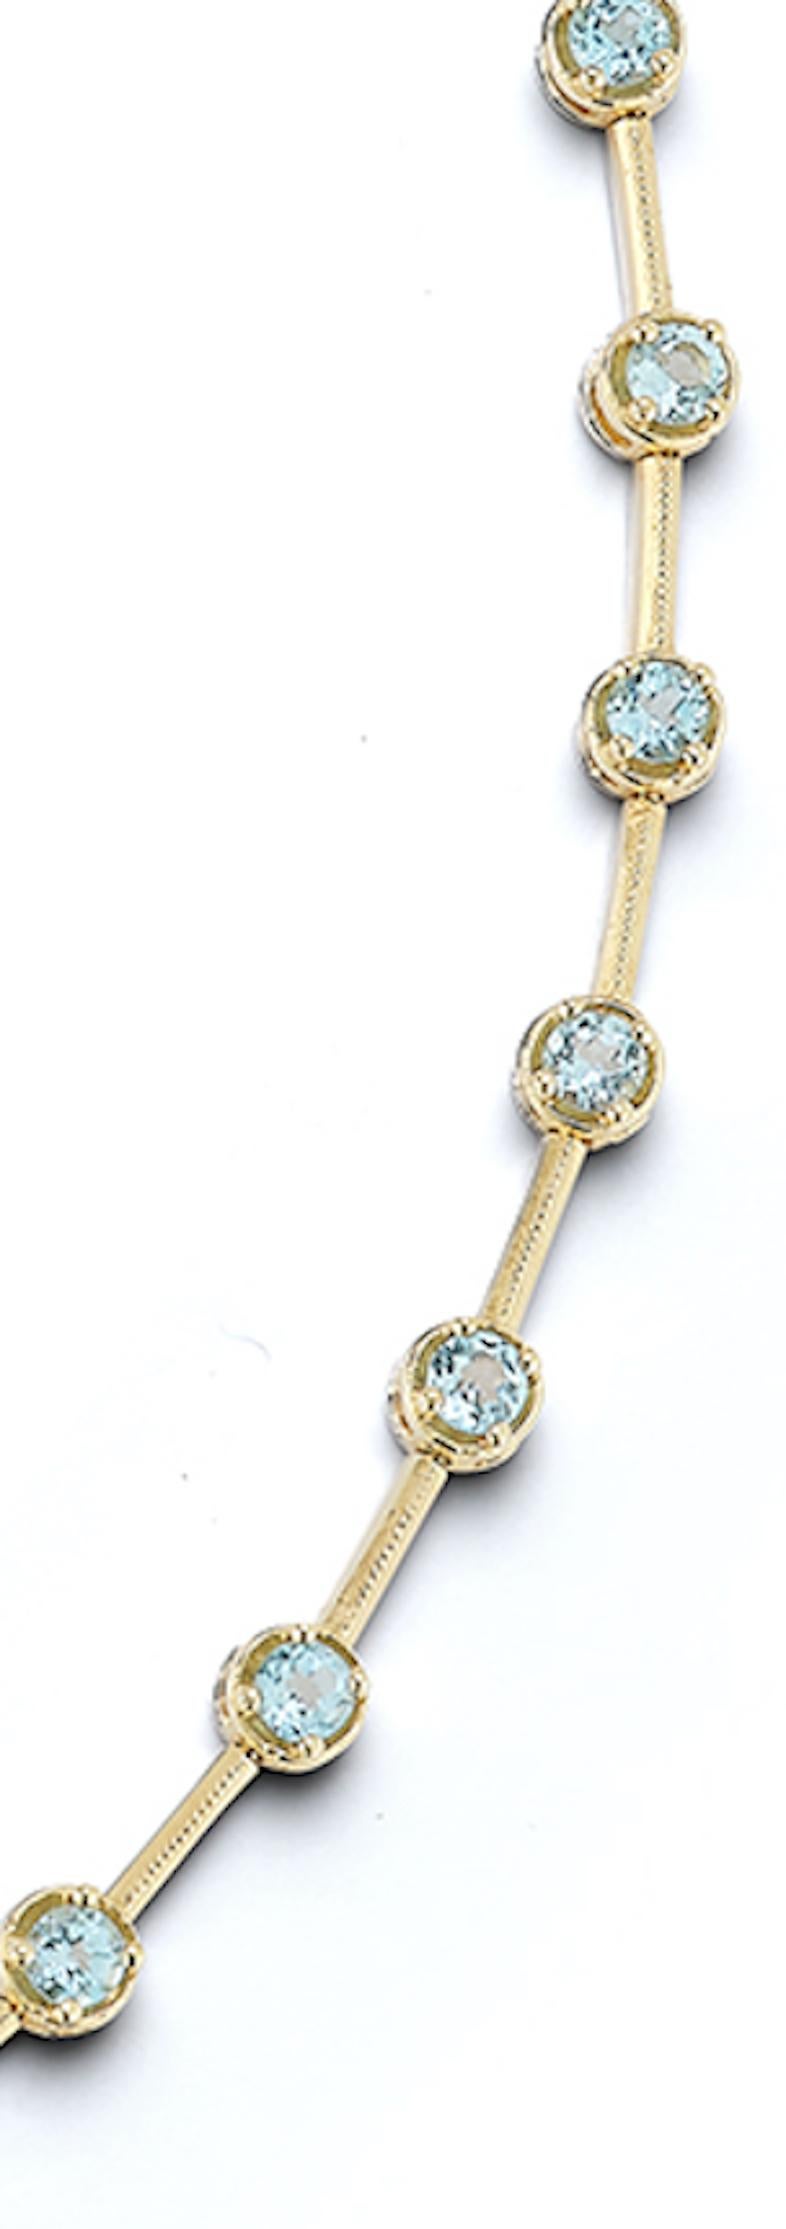 This retro vintage 14k gold necklace is elegant and unusual. Each bezel and prong set light blue topaz is divided by a gold bar creating an unexpected collar style station necklace. Bar style links sit at the back with 28 bezel set topazes along the